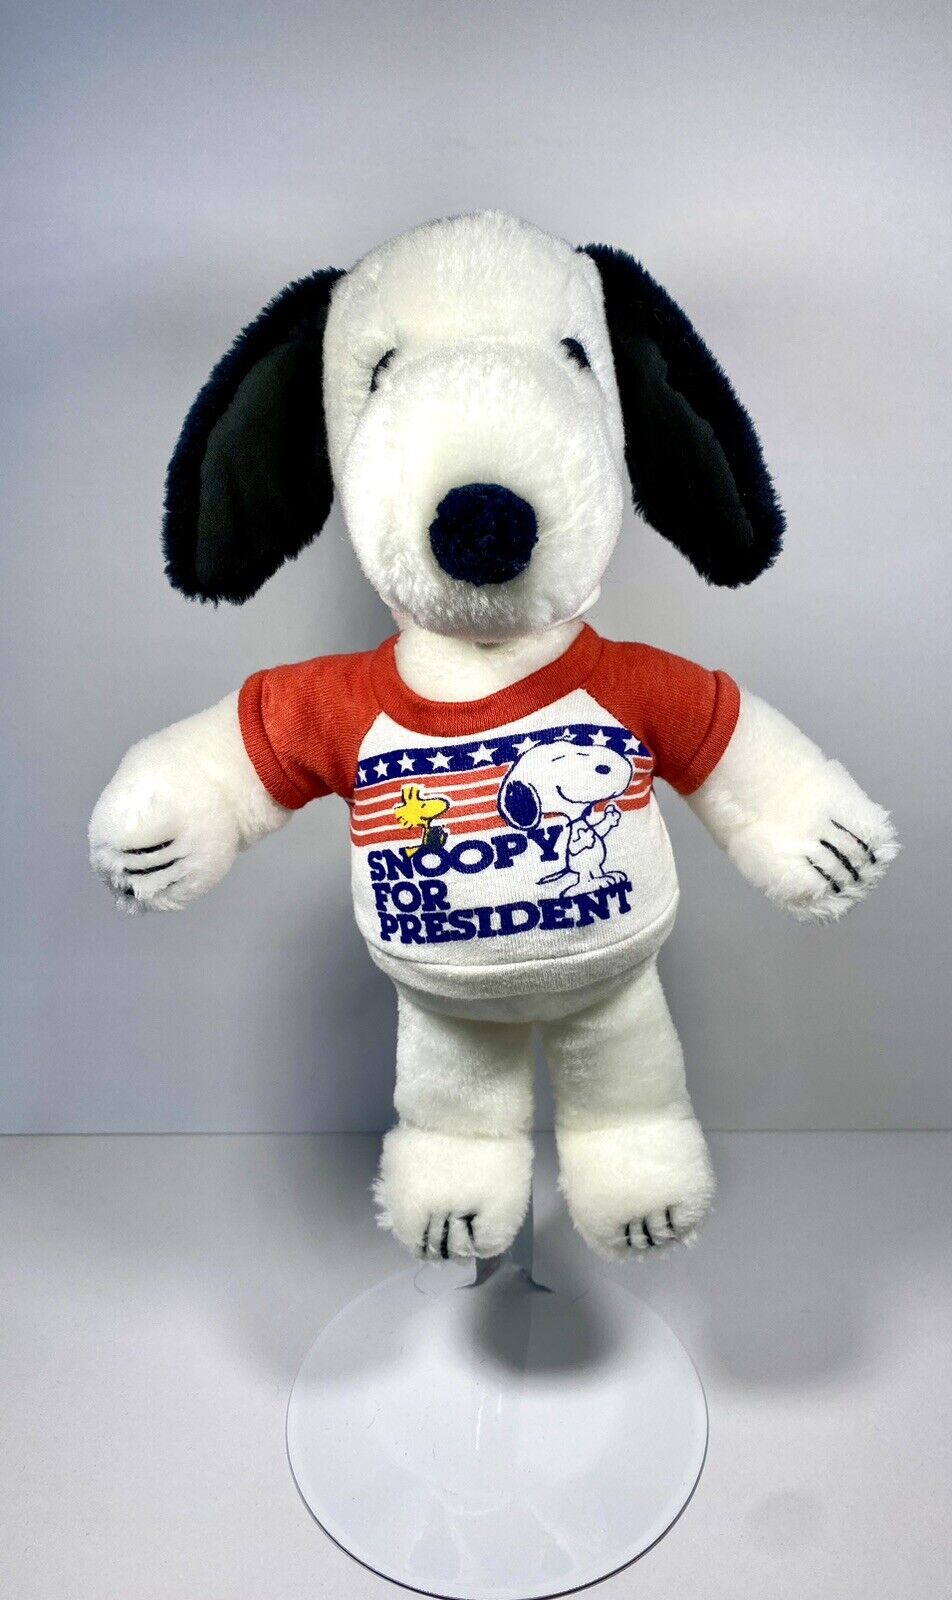 Snoopy Clothes Outfit Plush Stuffed Animal Shirt Snoopy For President Election